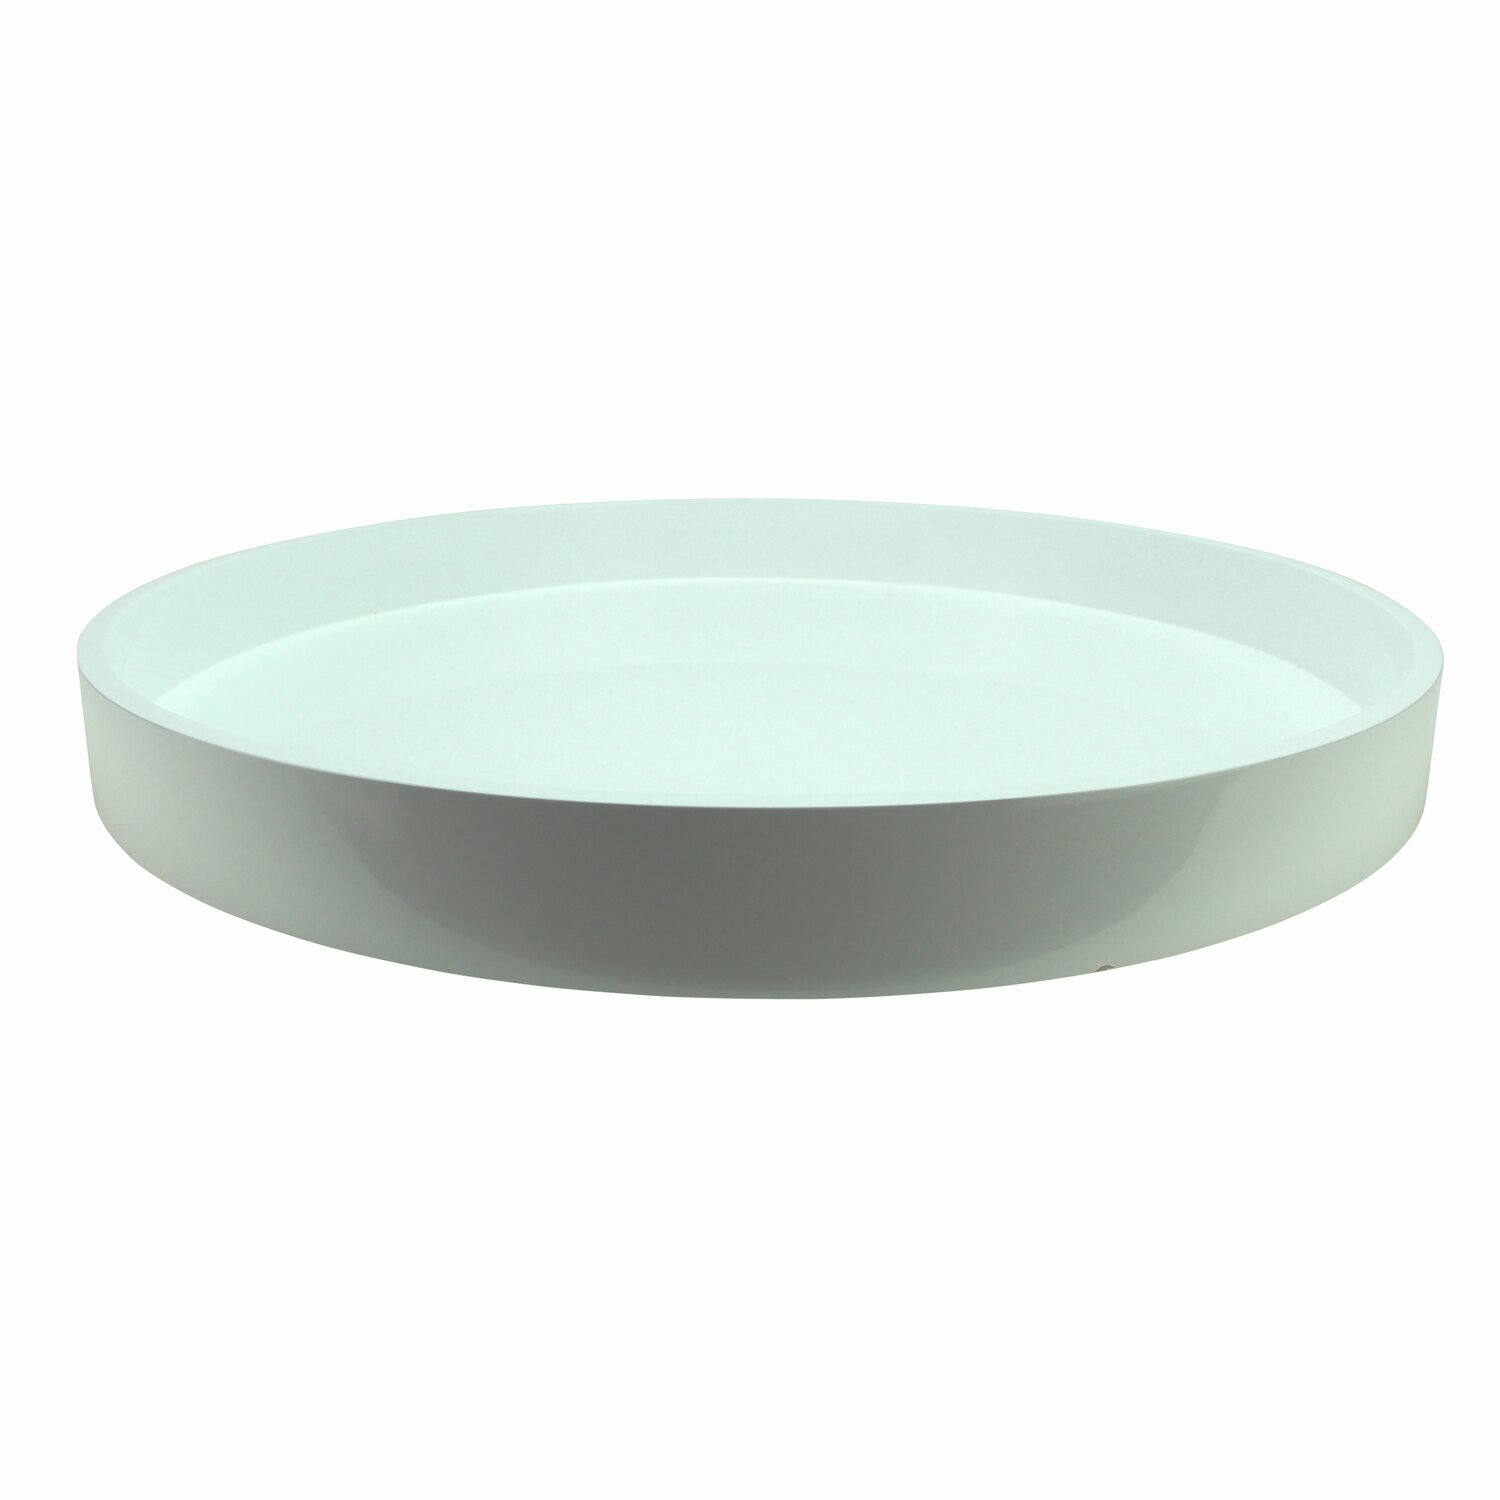 Addison Ross 20 x 20 Inch Round Tray White Lacquer TR8700